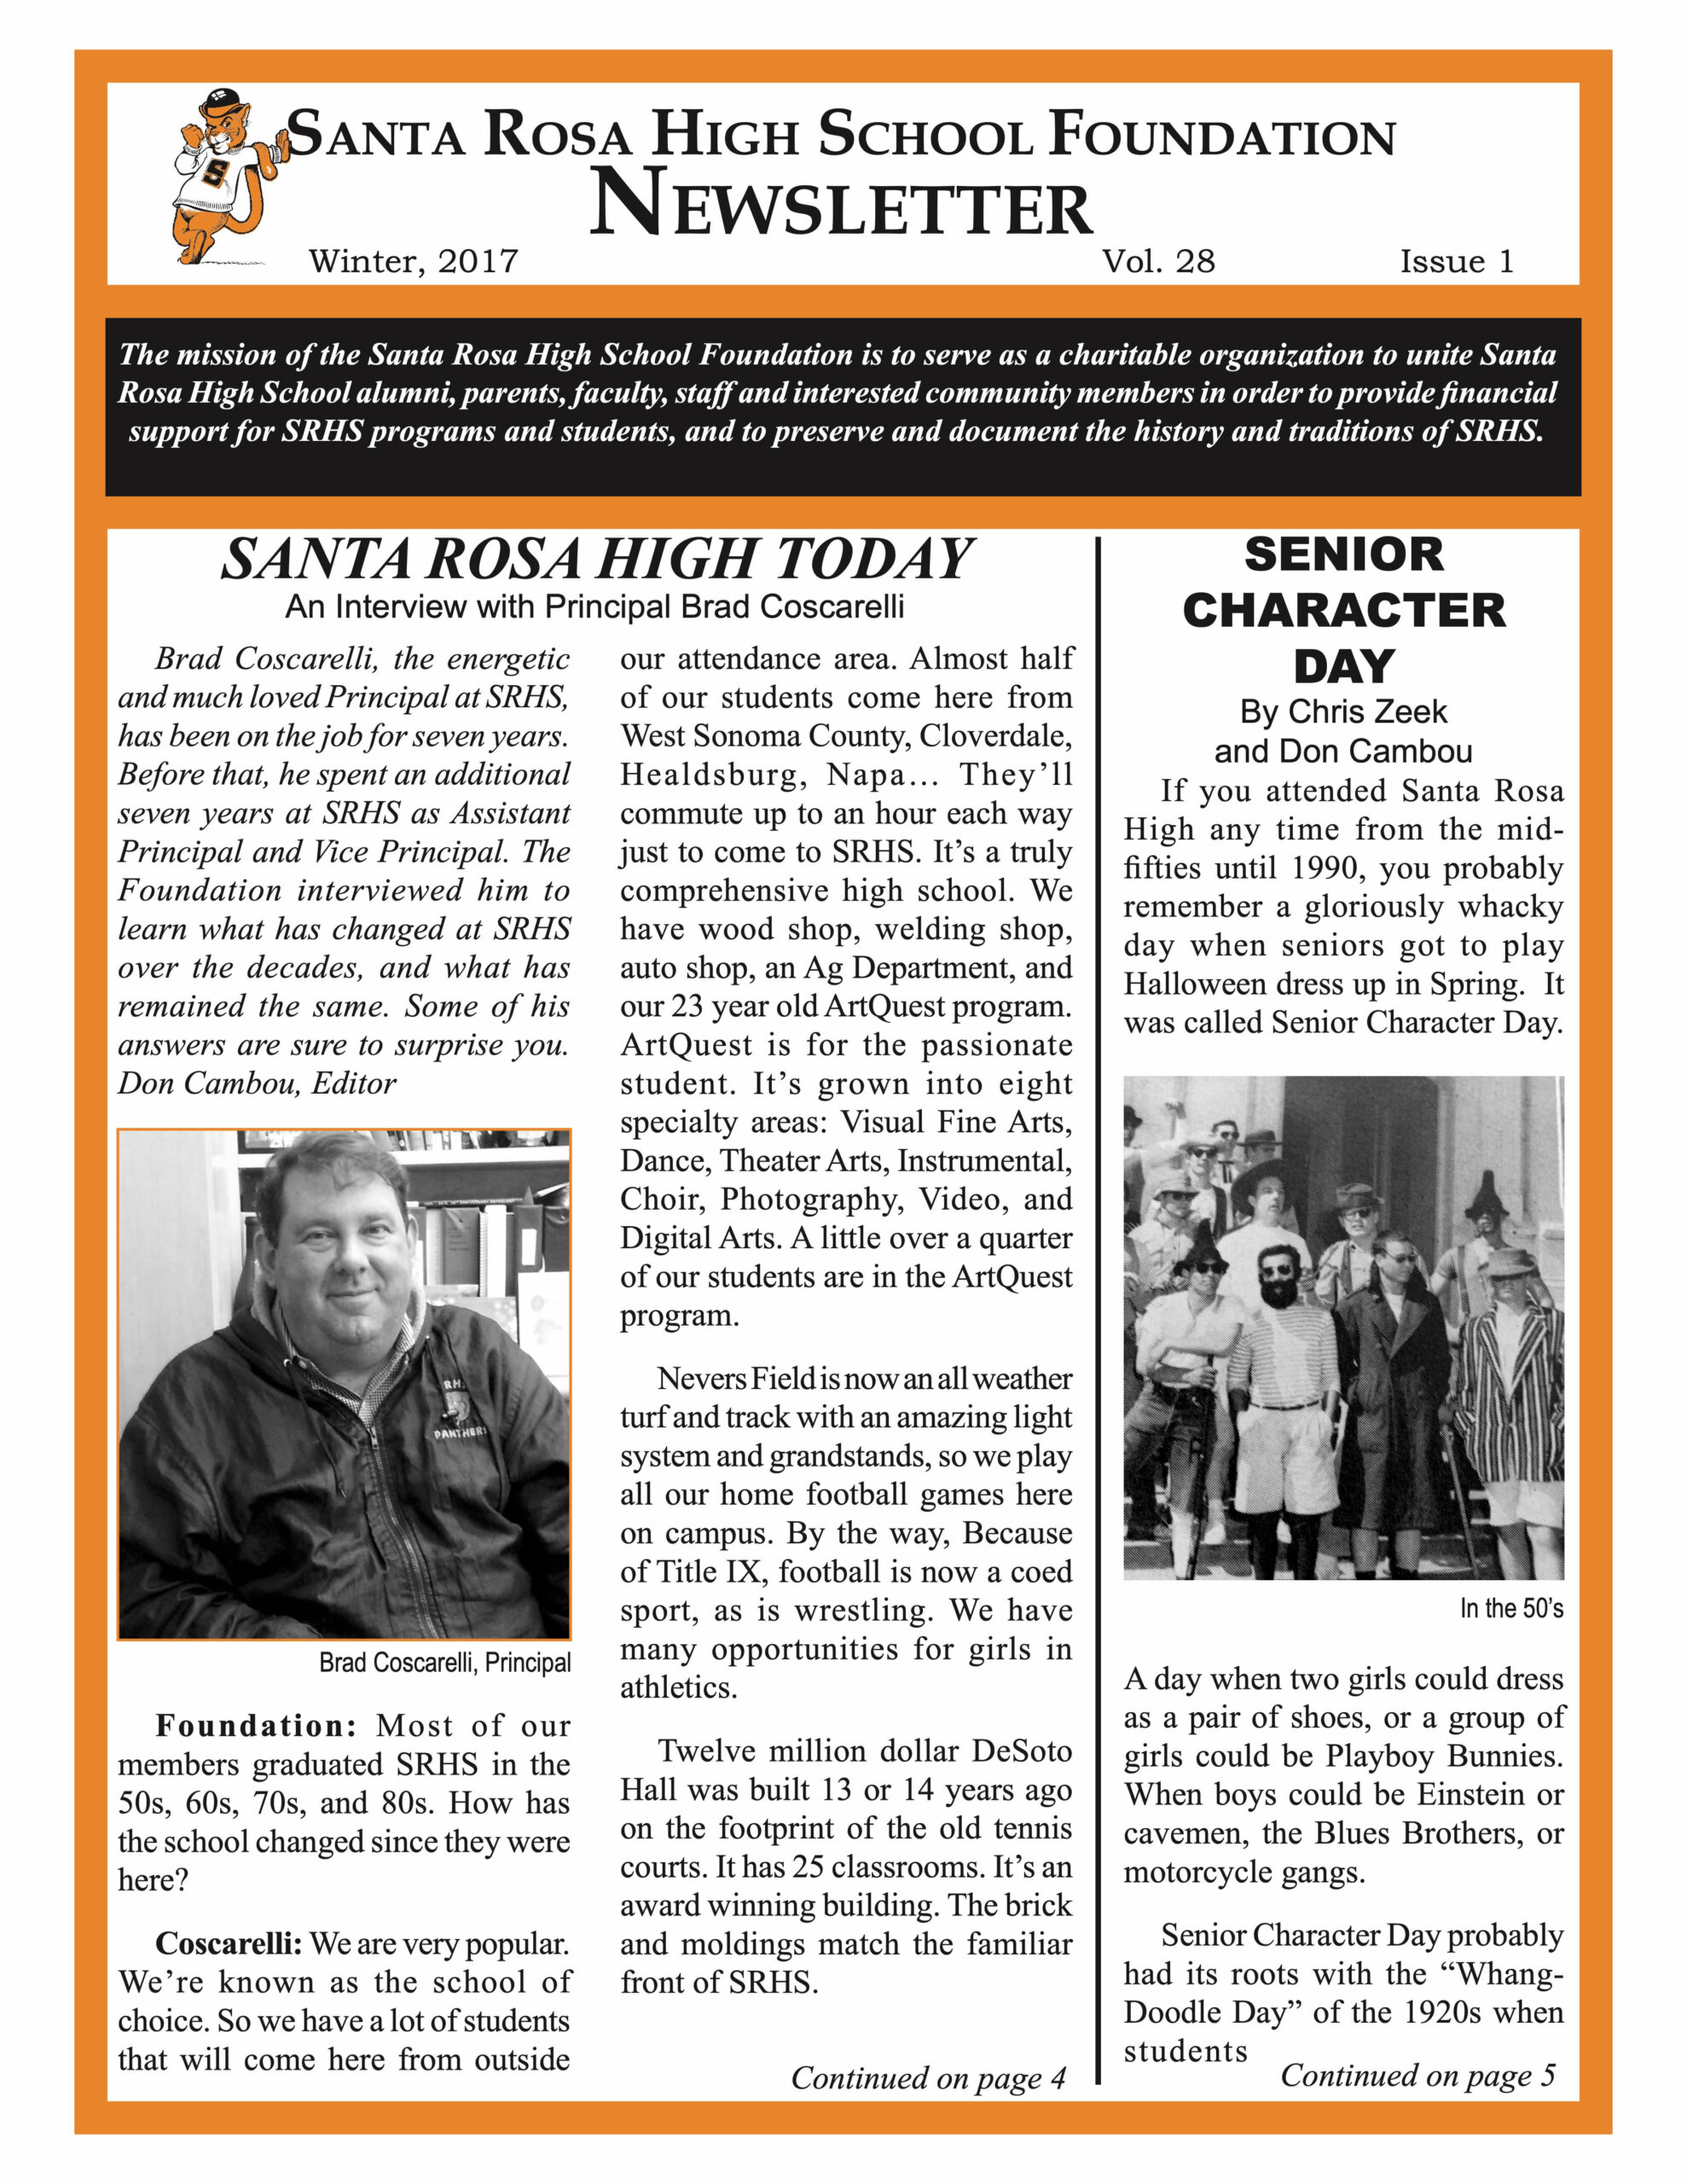 Newsletter front page - Winter 2017